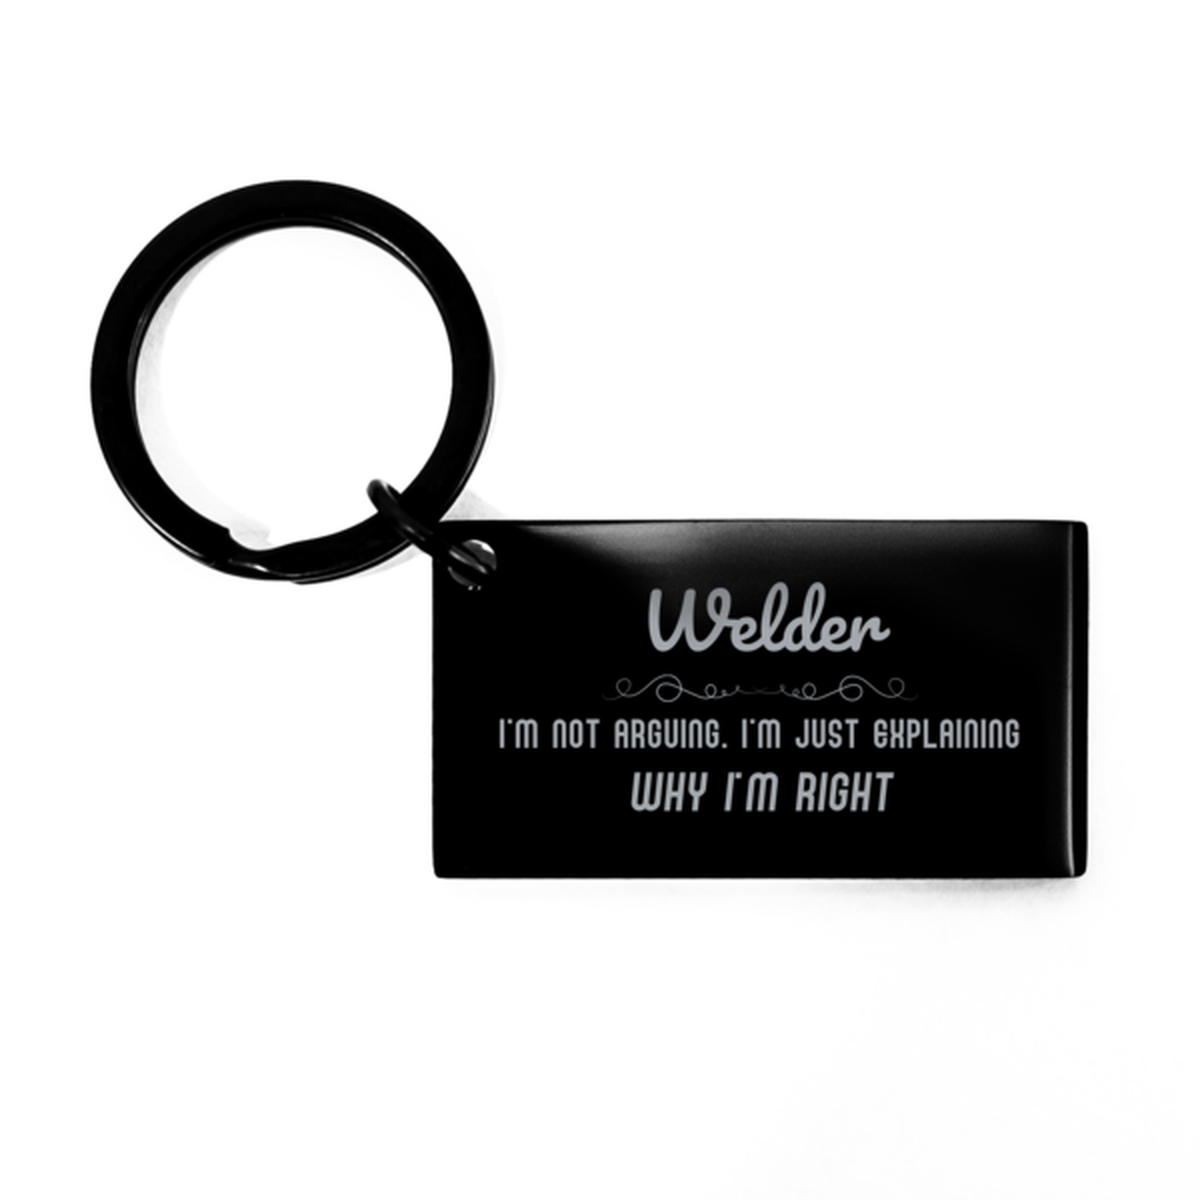 Welder I'm not Arguing. I'm Just Explaining Why I'm RIGHT Keychain, Funny Saying Quote Welder Gifts For Welder Graduation Birthday Christmas Gifts for Men Women Coworker